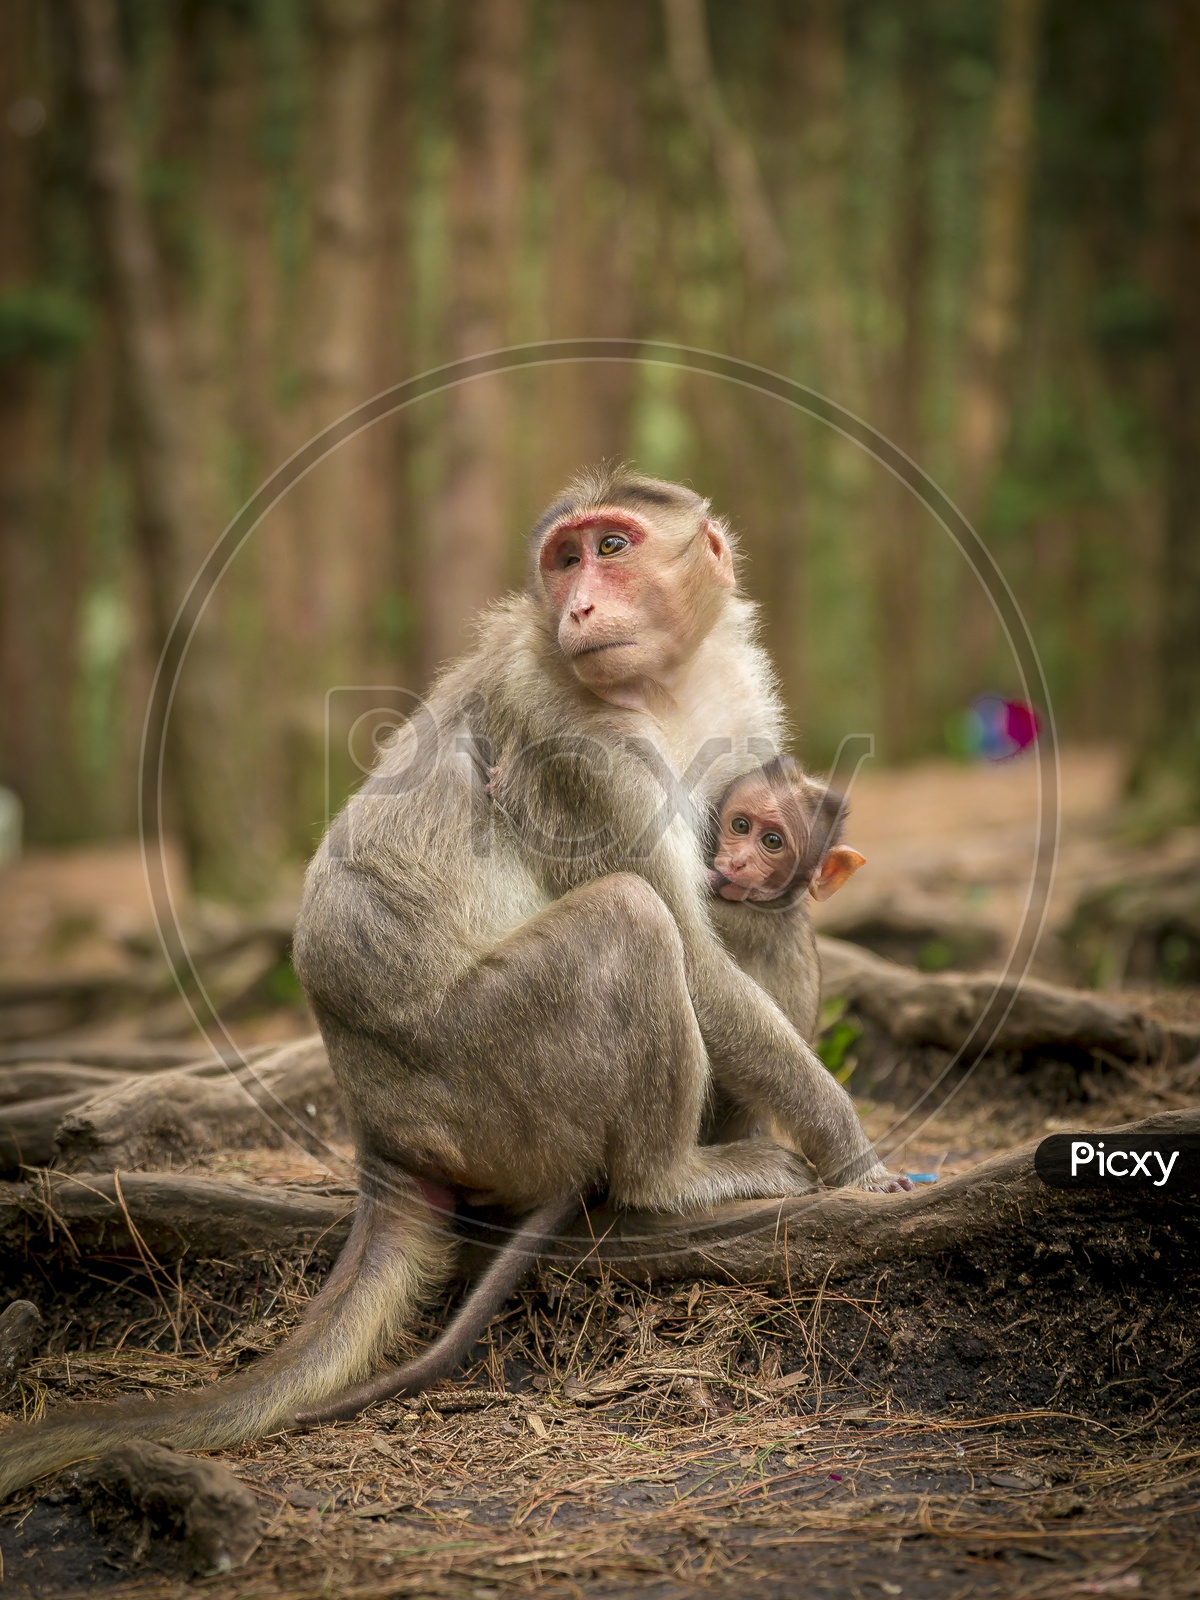 A Young Monkey or Macaque  With Baby Monkey